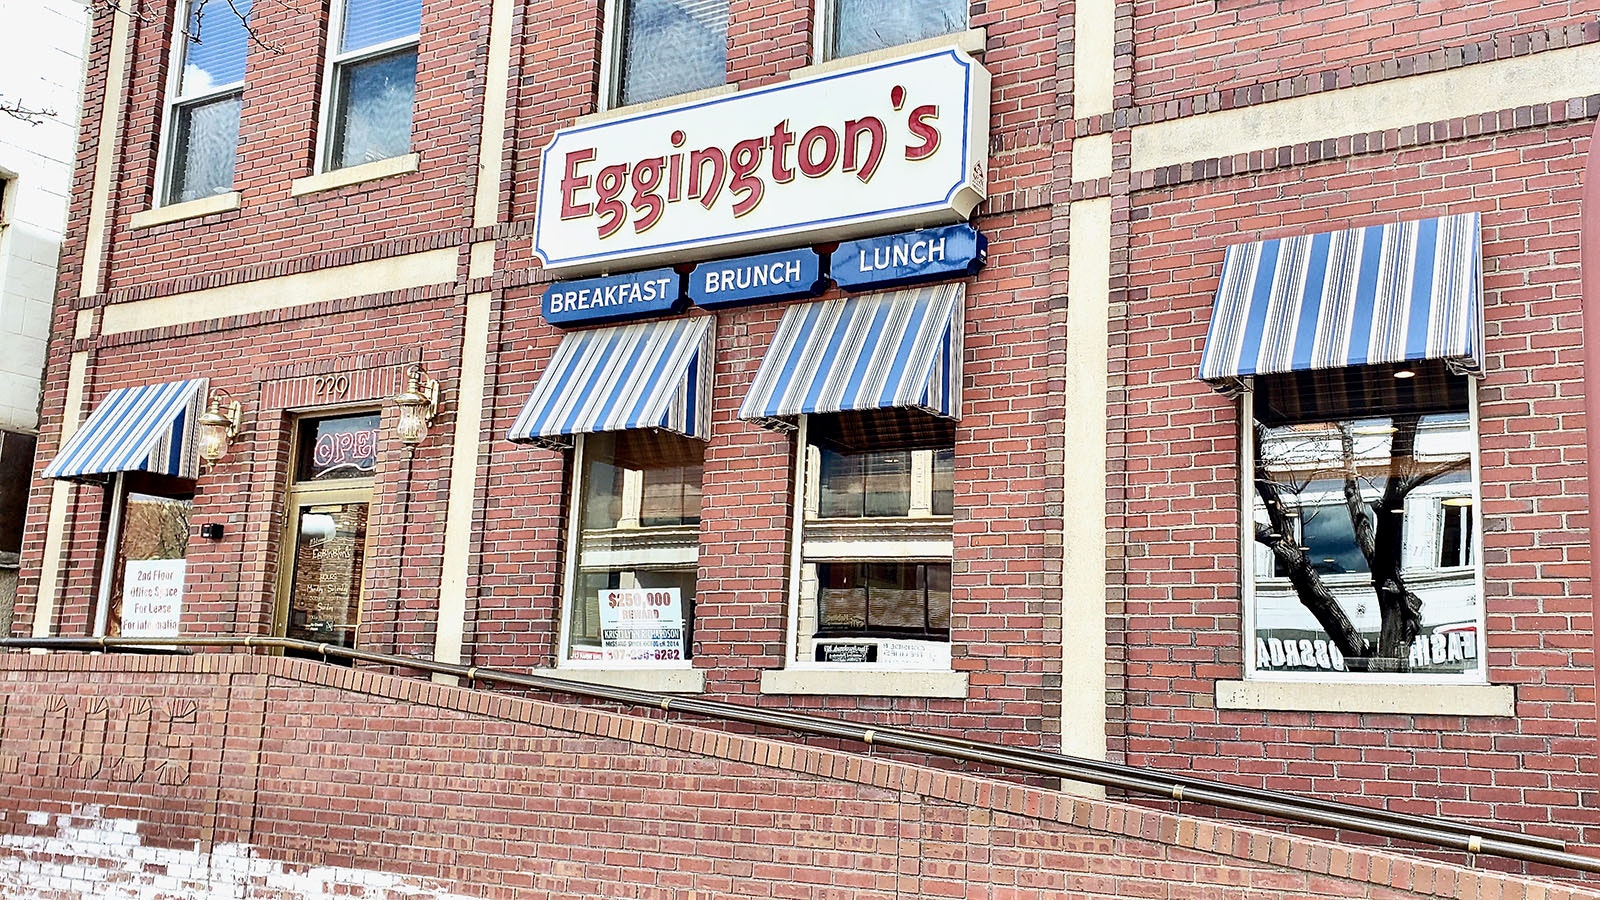 Eggington's in Casper is about to expand its brand throughout the Cowboy State and into Arizona.